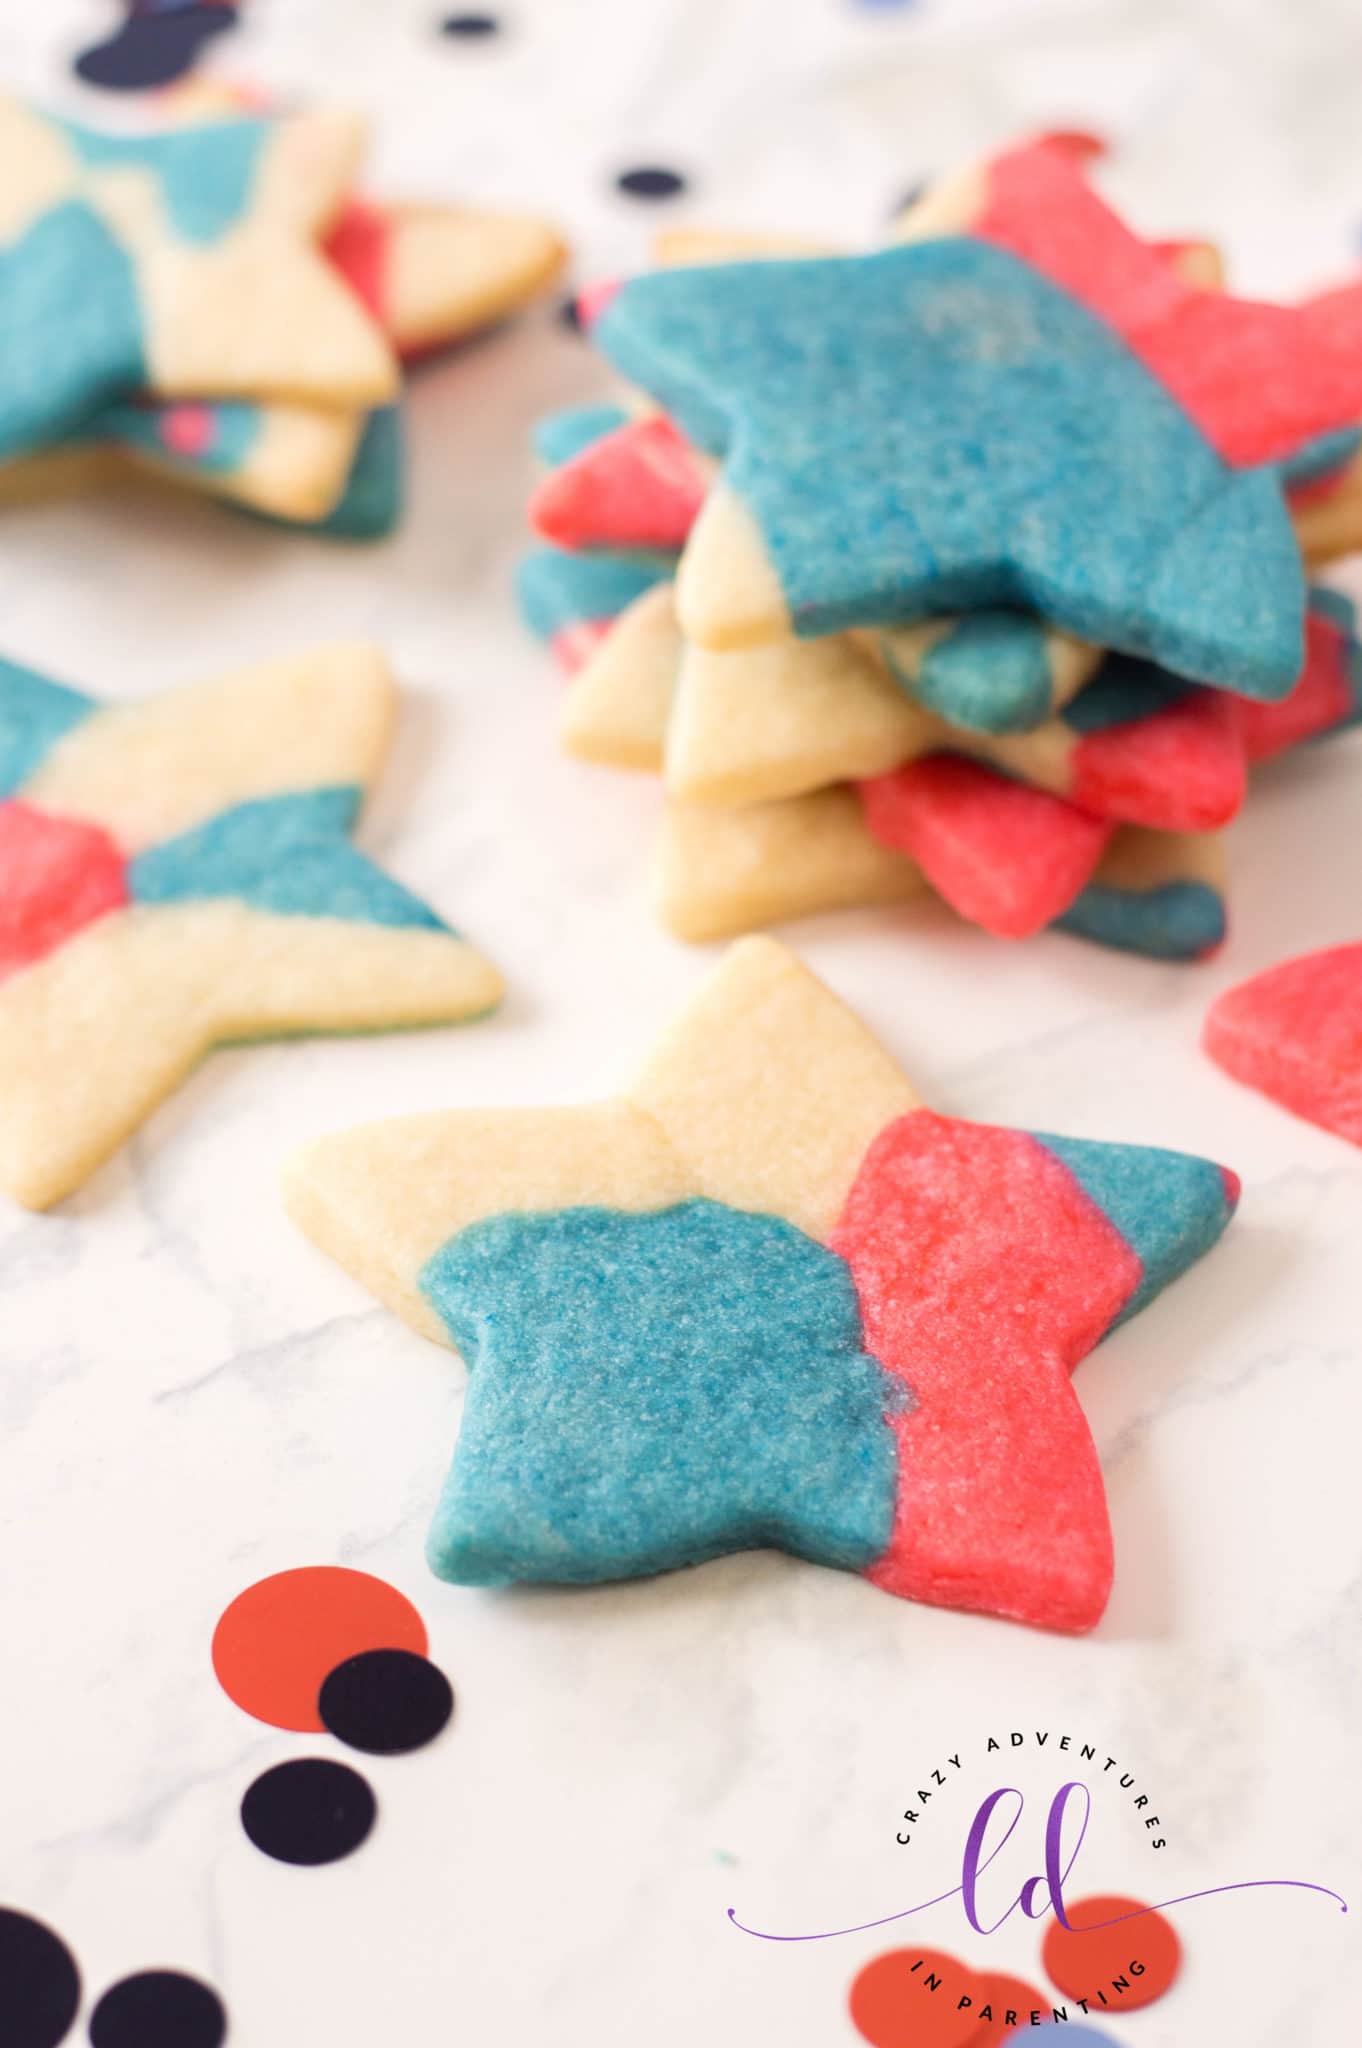 Patriotic Sugar Cookies Recipe for Fourth of July